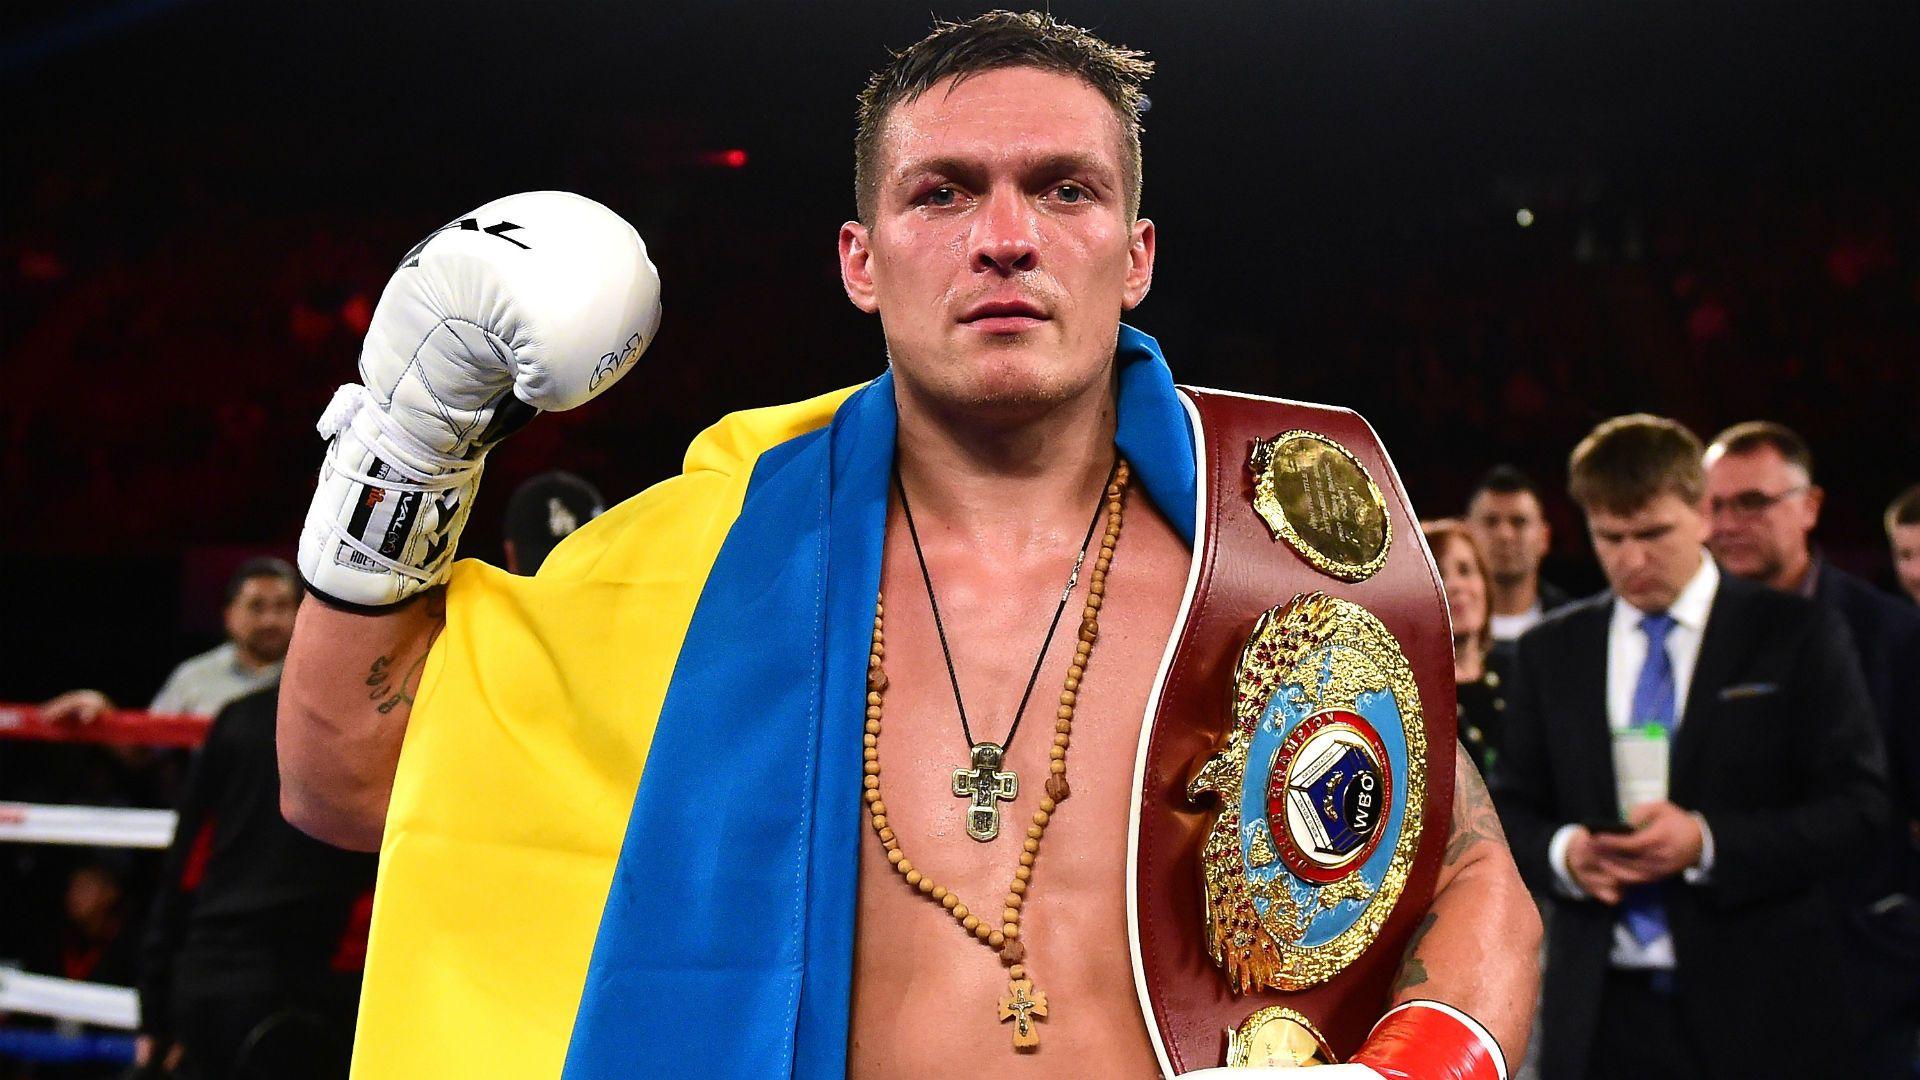 Oleksandr Usyk signs with Matchroom Boxing, next fight to be